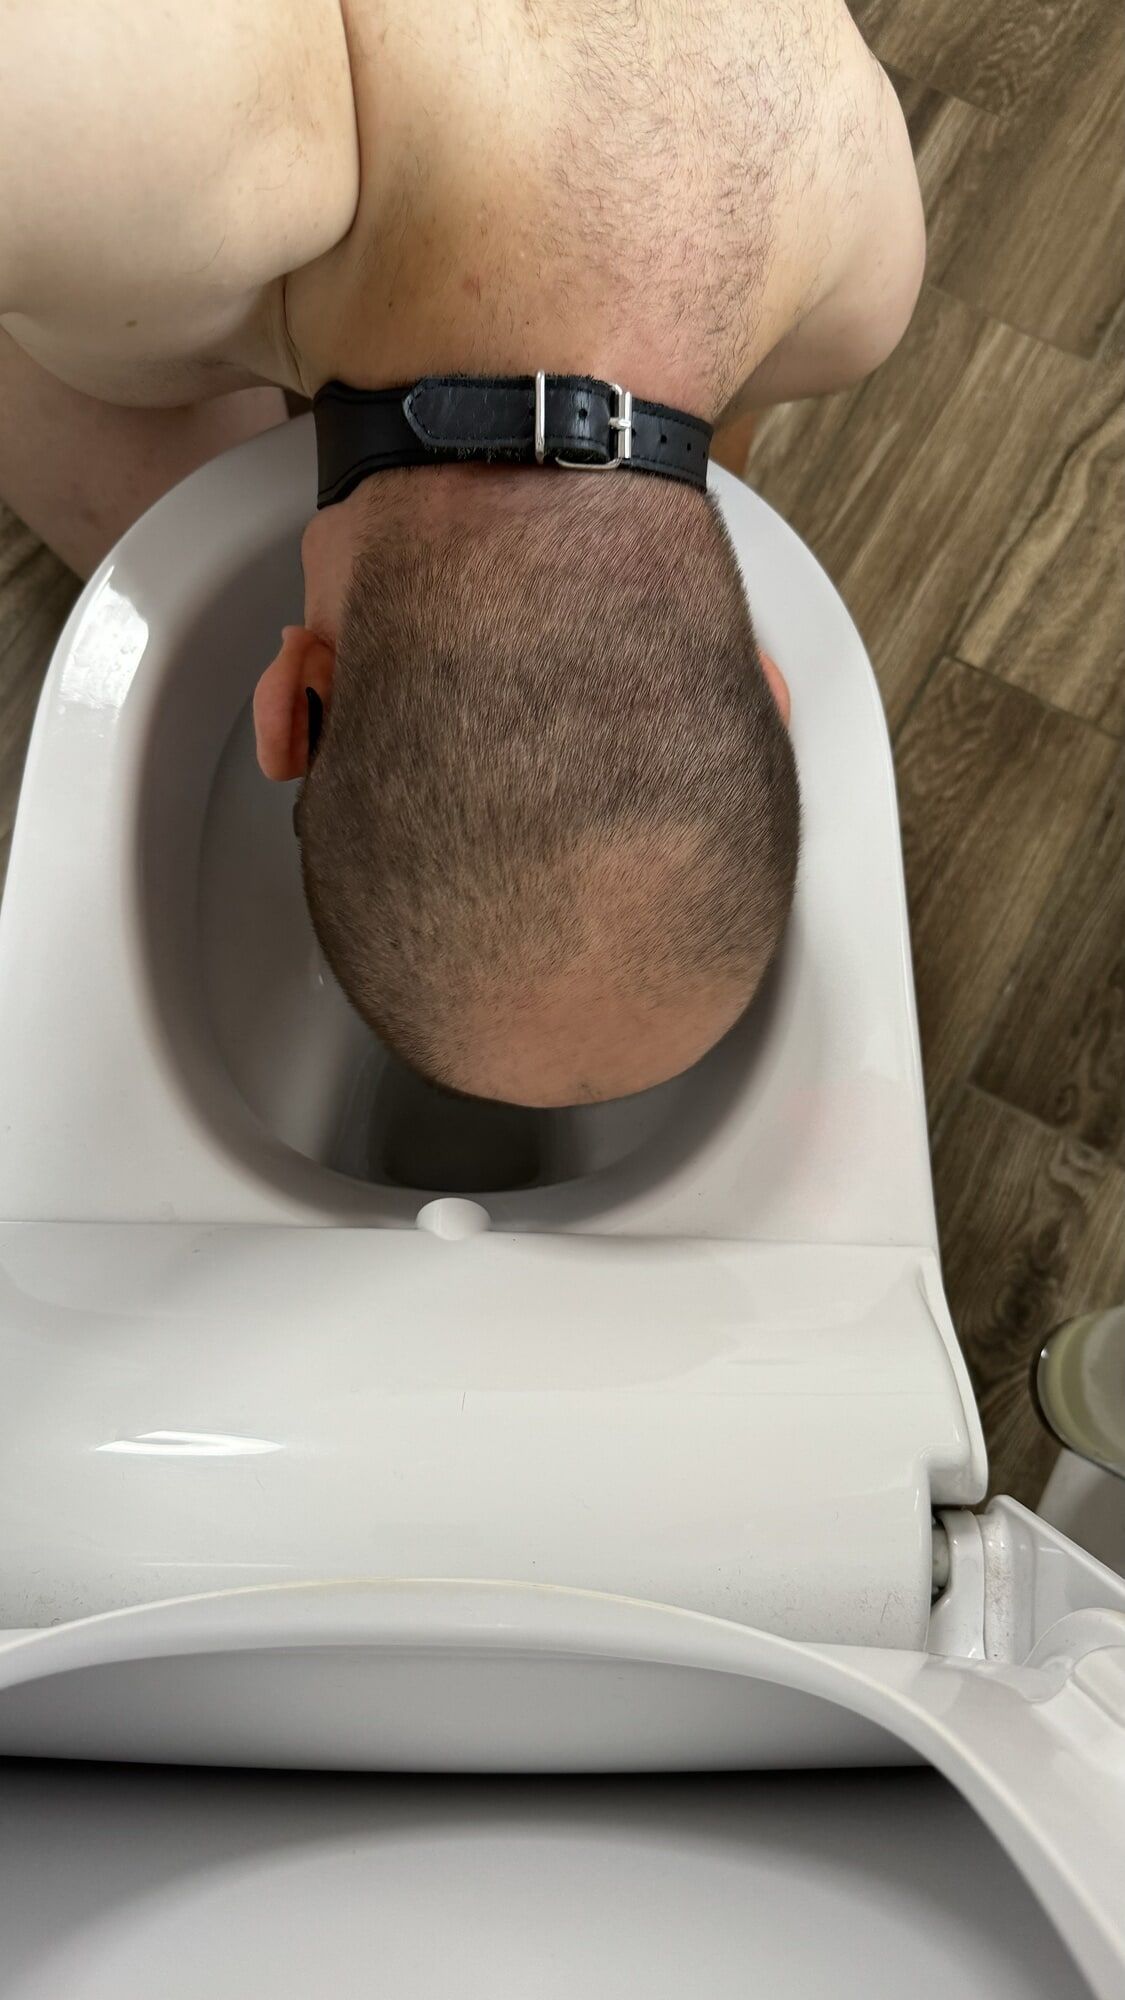 Slave pig has to clean toilet with his tongue #6